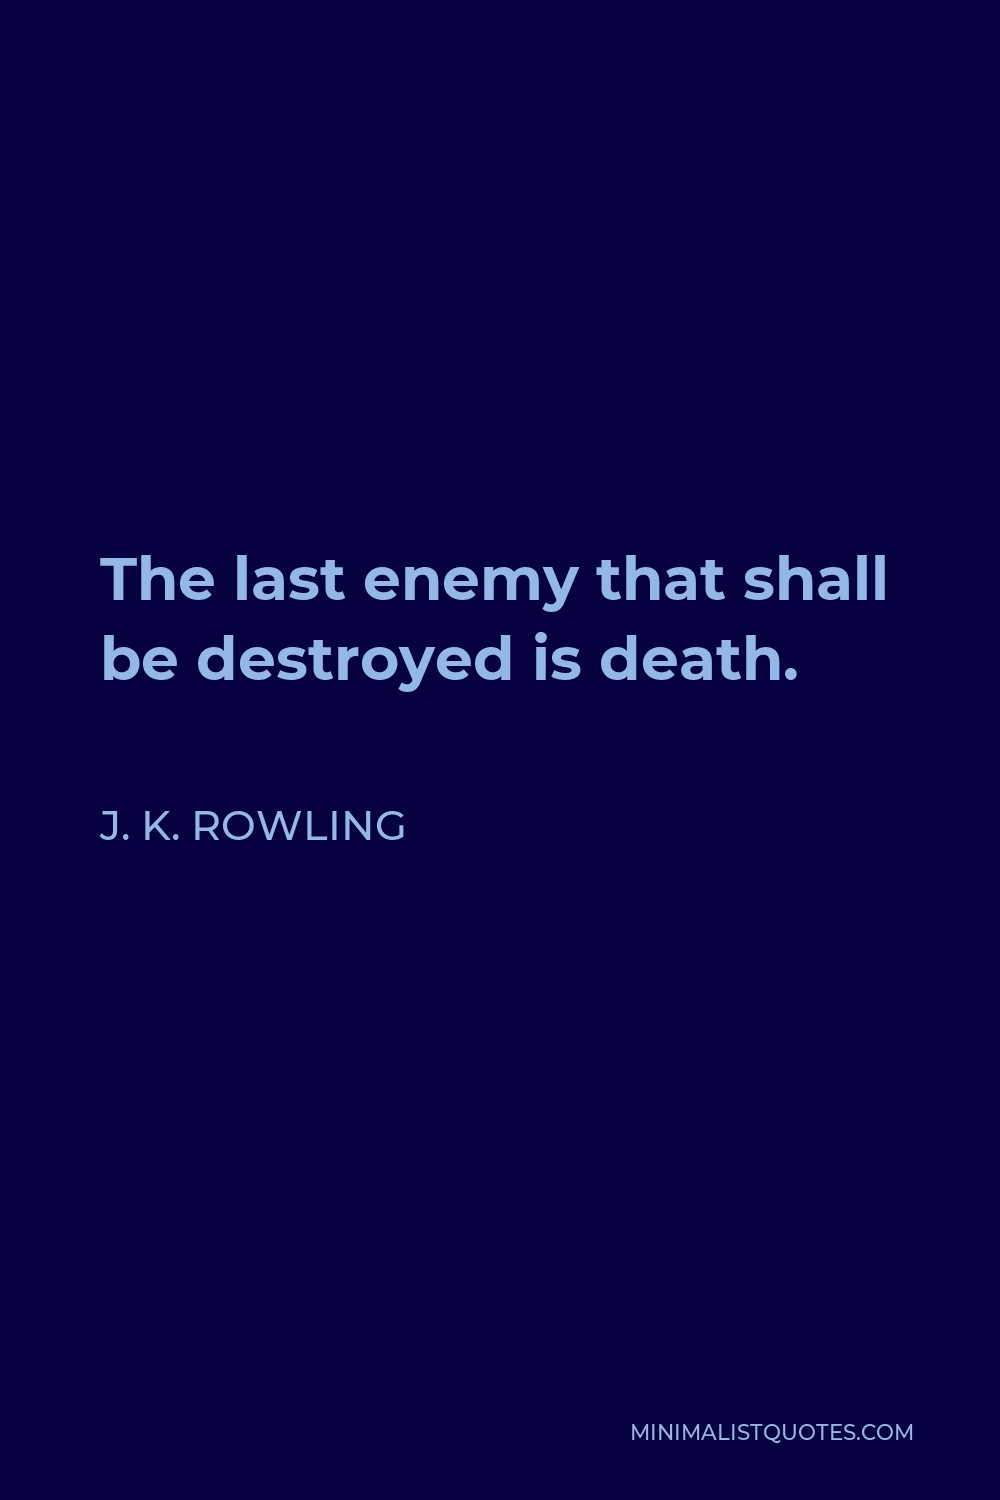 J. K. Rowling Quote - The last enemy that shall be destroyed is death.